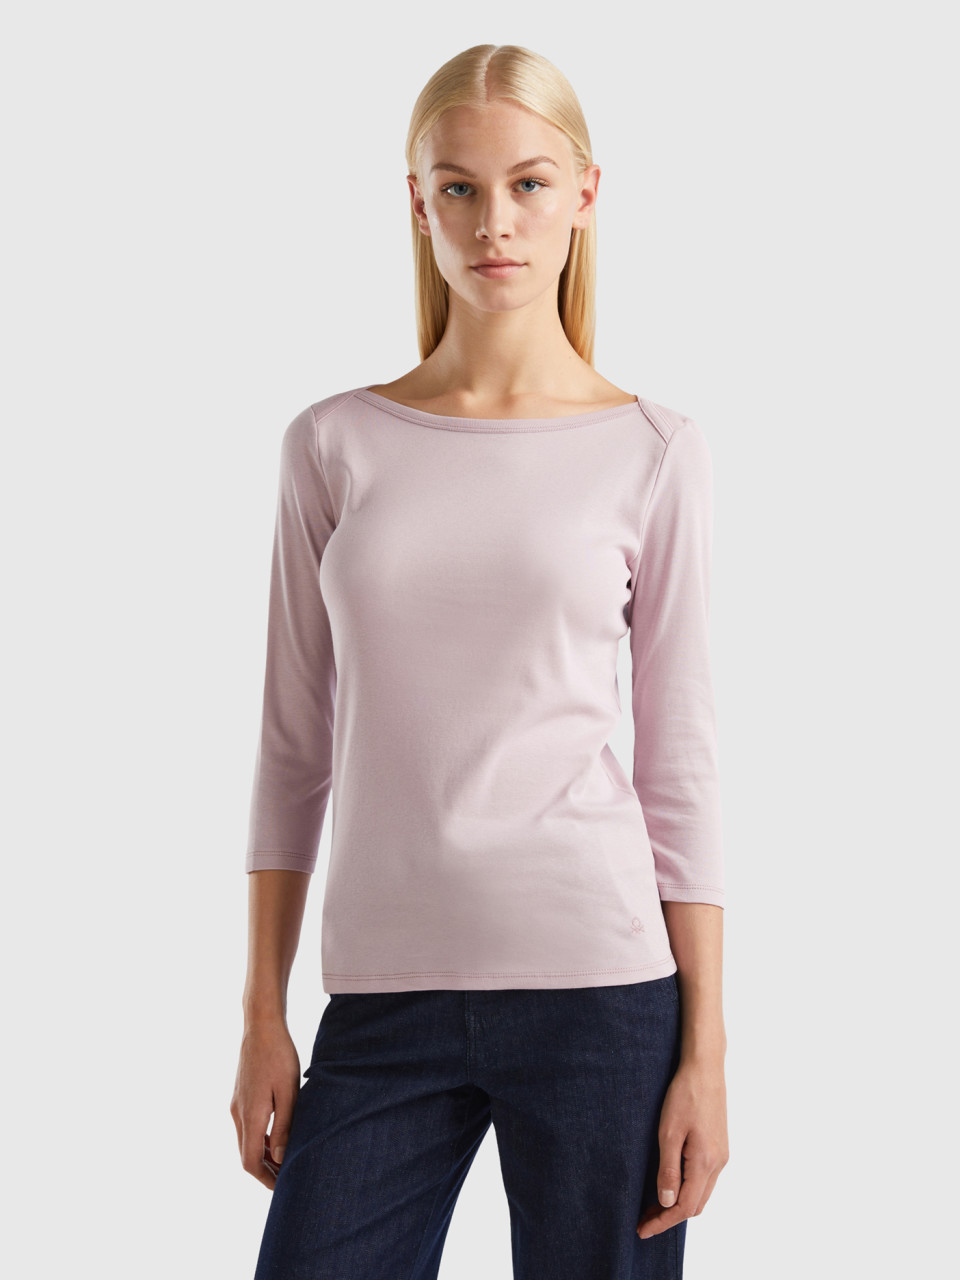 Benetton, T-shirt With Boat Neck In 100% Cotton, Lilac, Women